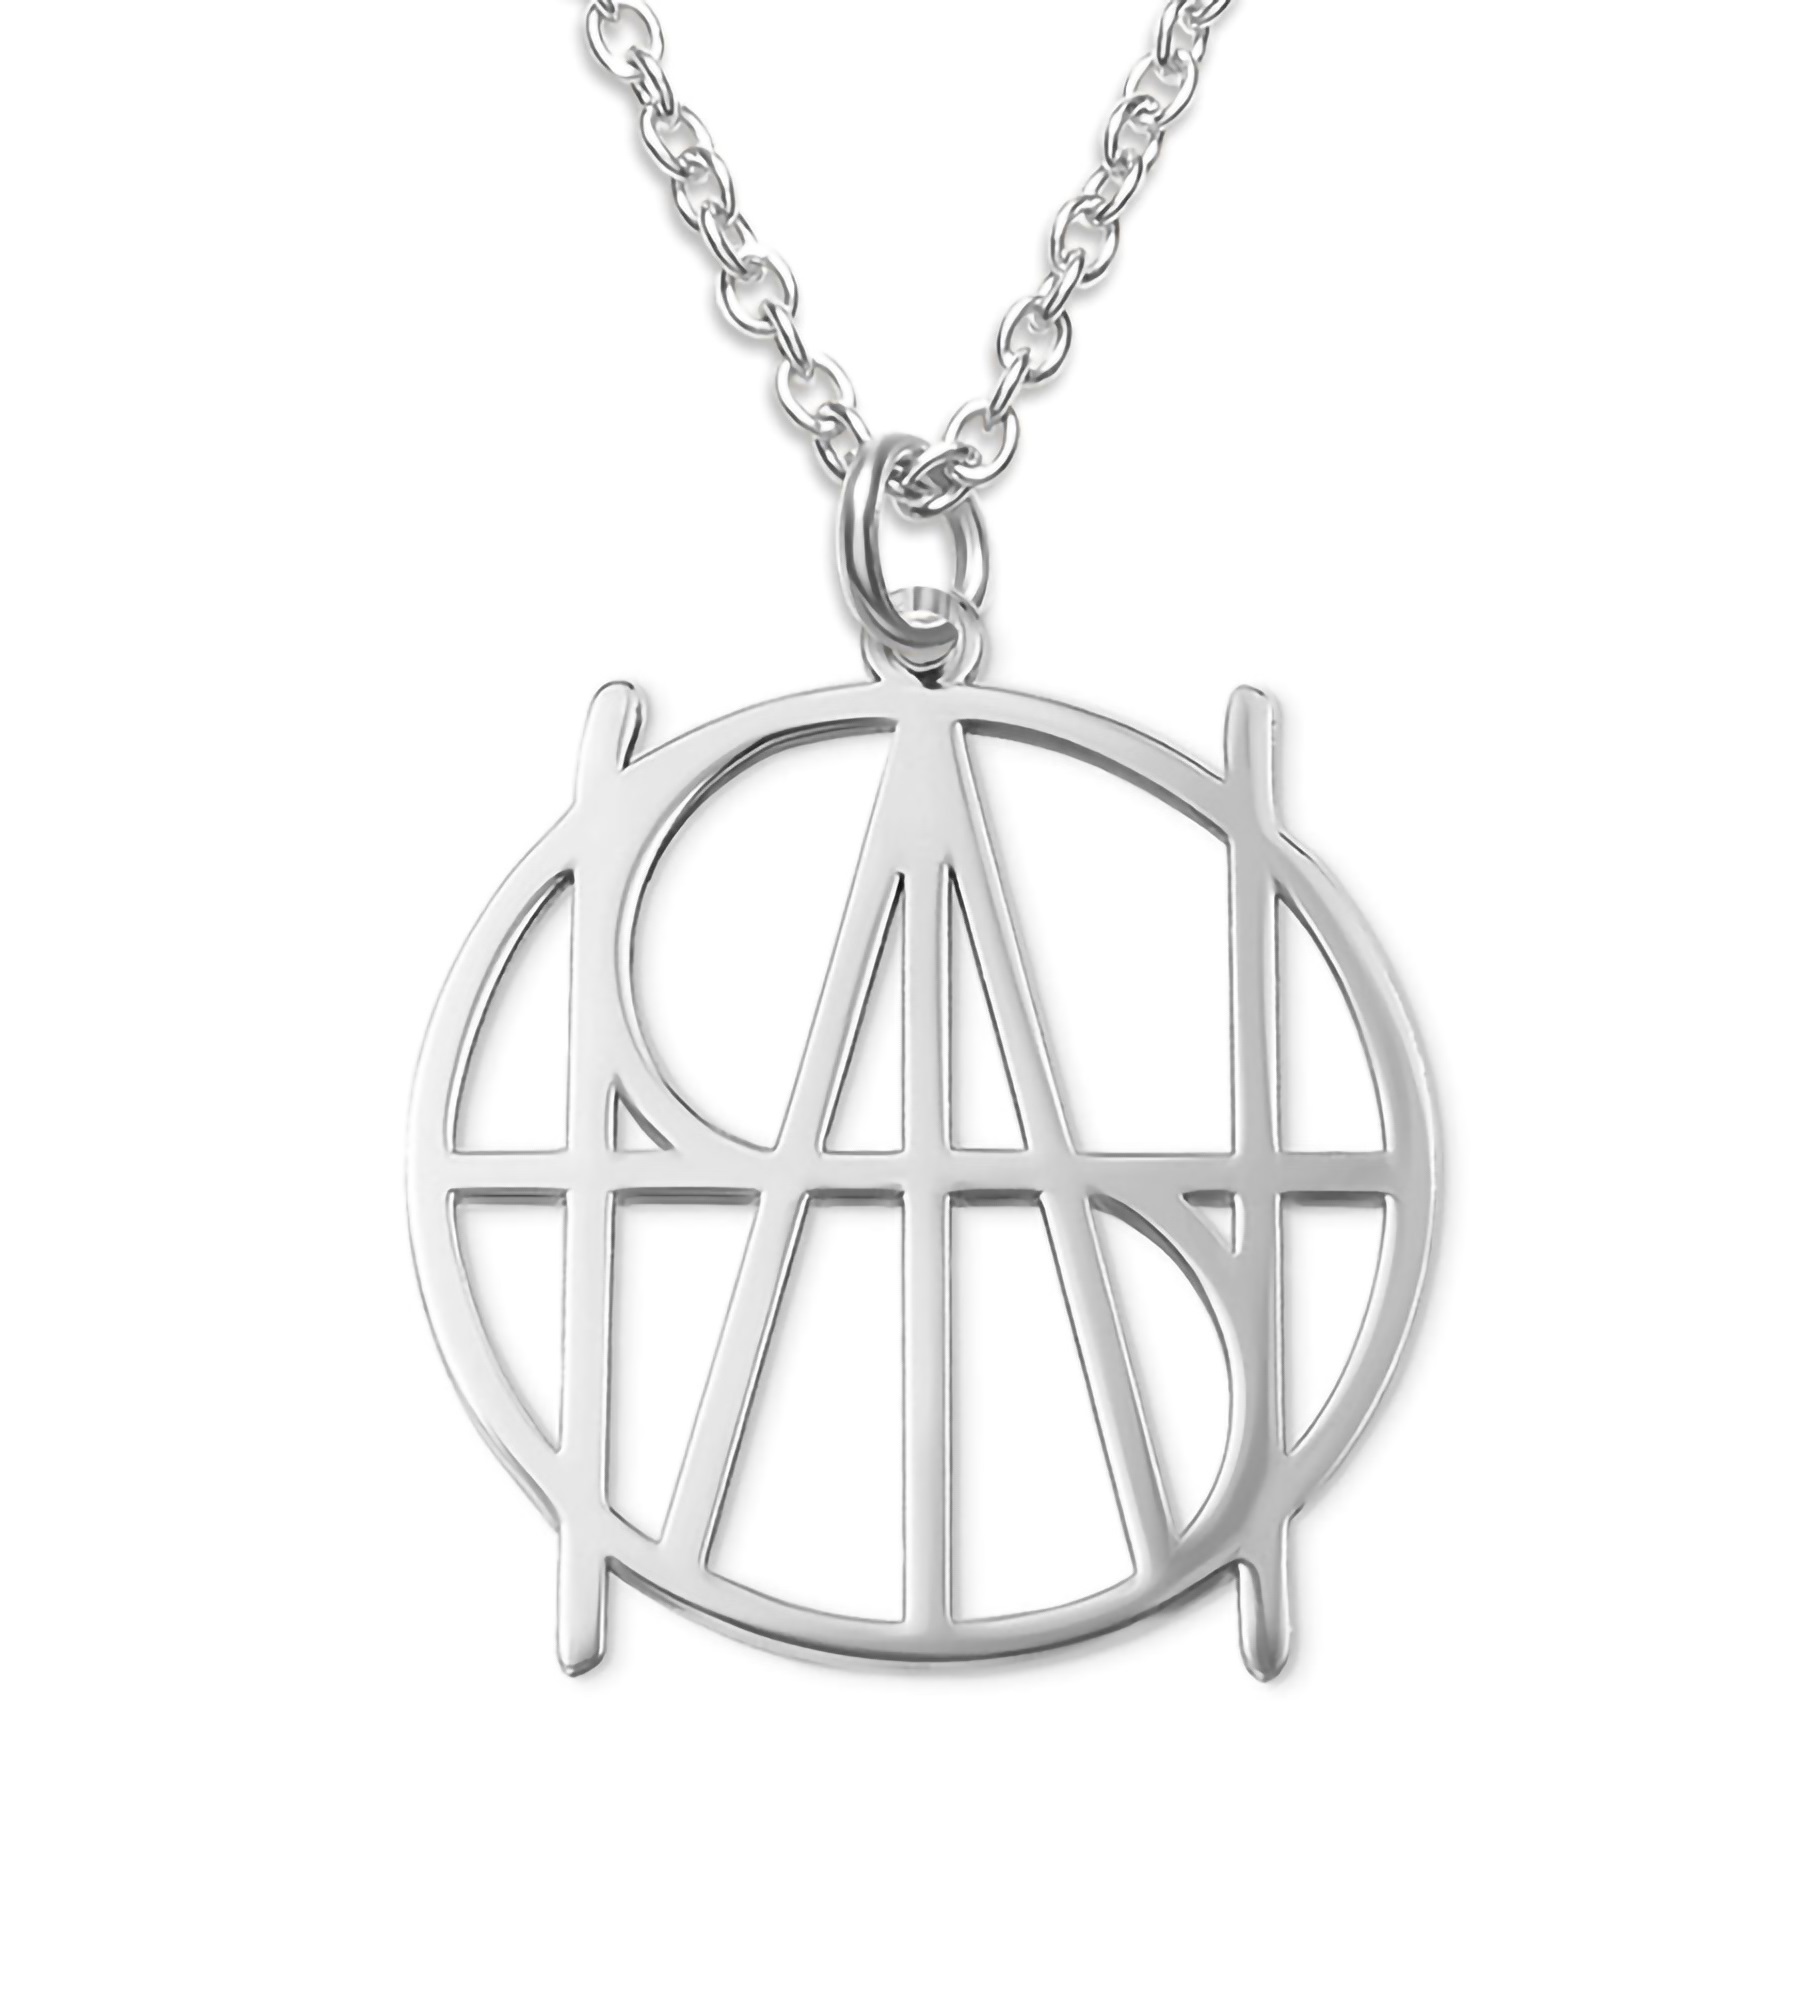 Personalized Geometrical Name Necklace